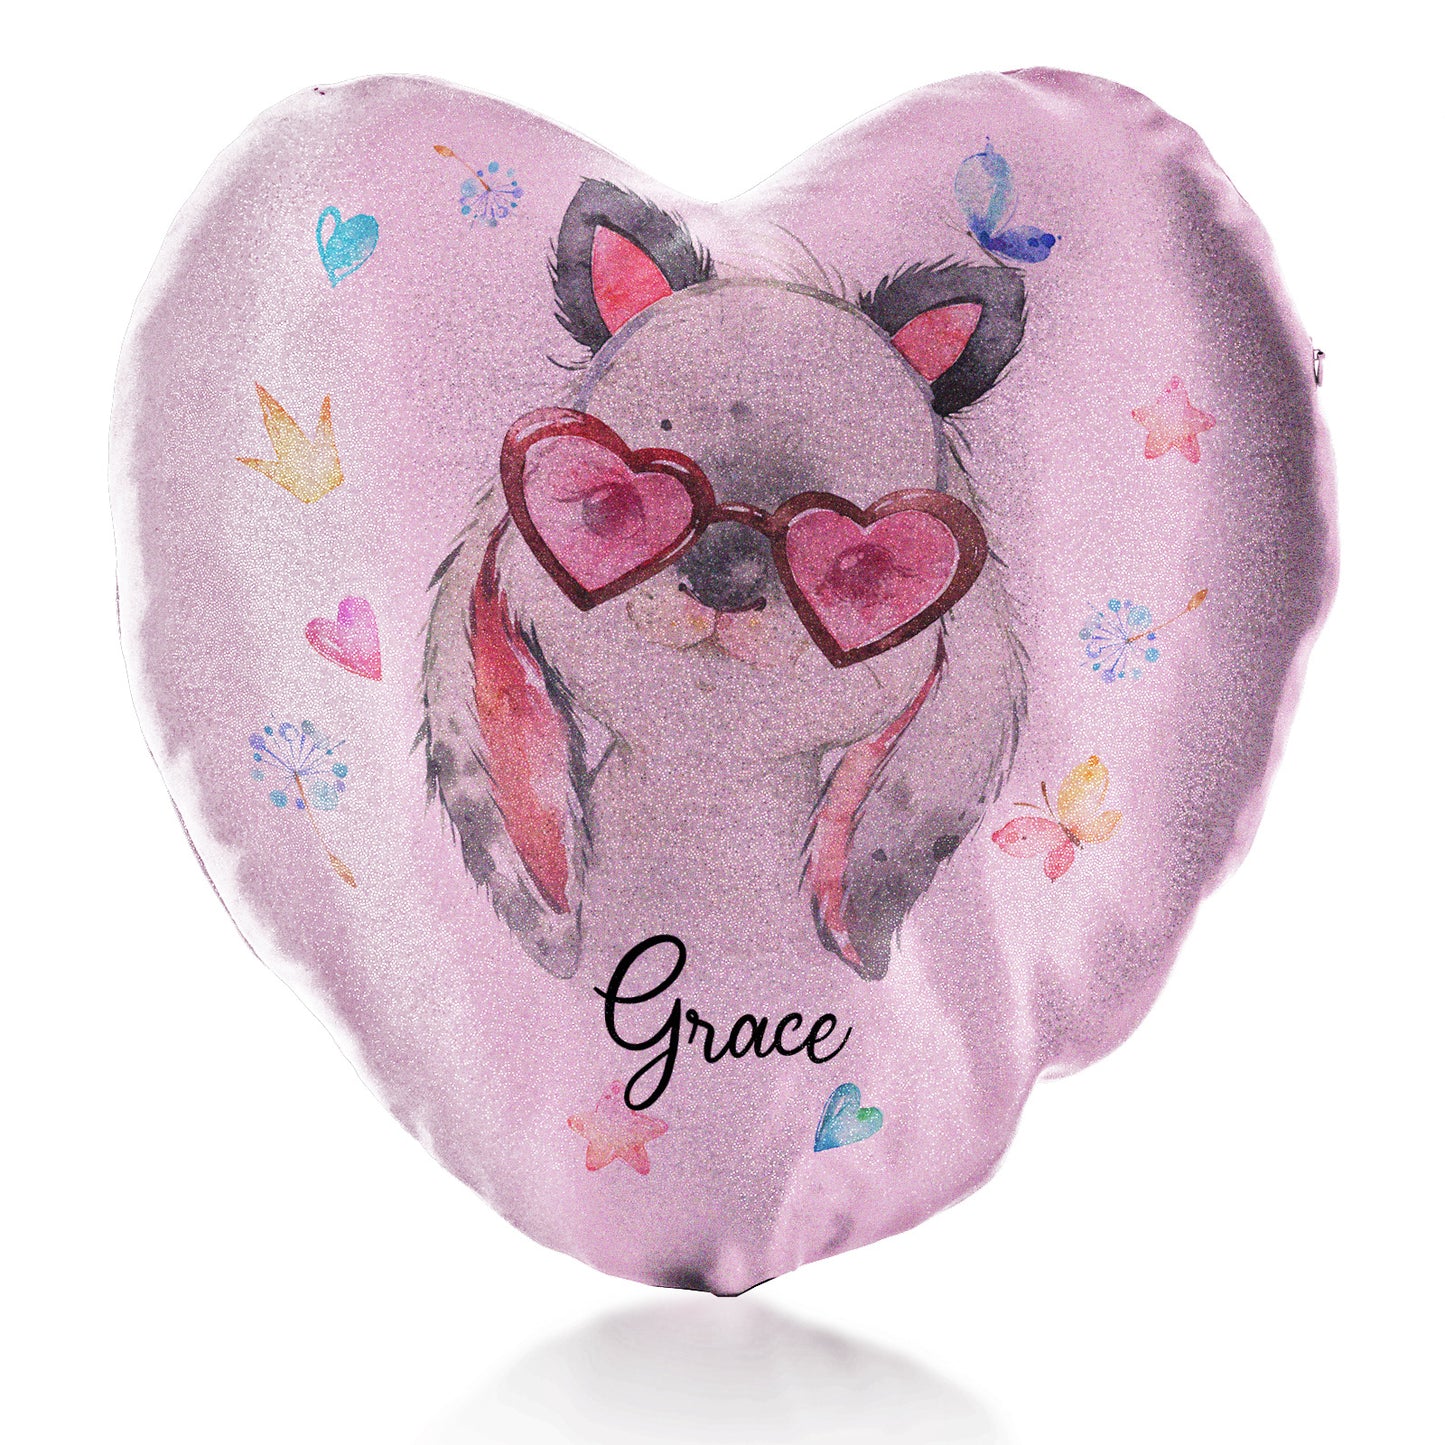 Personalised Glitter Heart Cushion with Grey Rabbit with Cat ears and Pink Heart Glasses and Cute Text